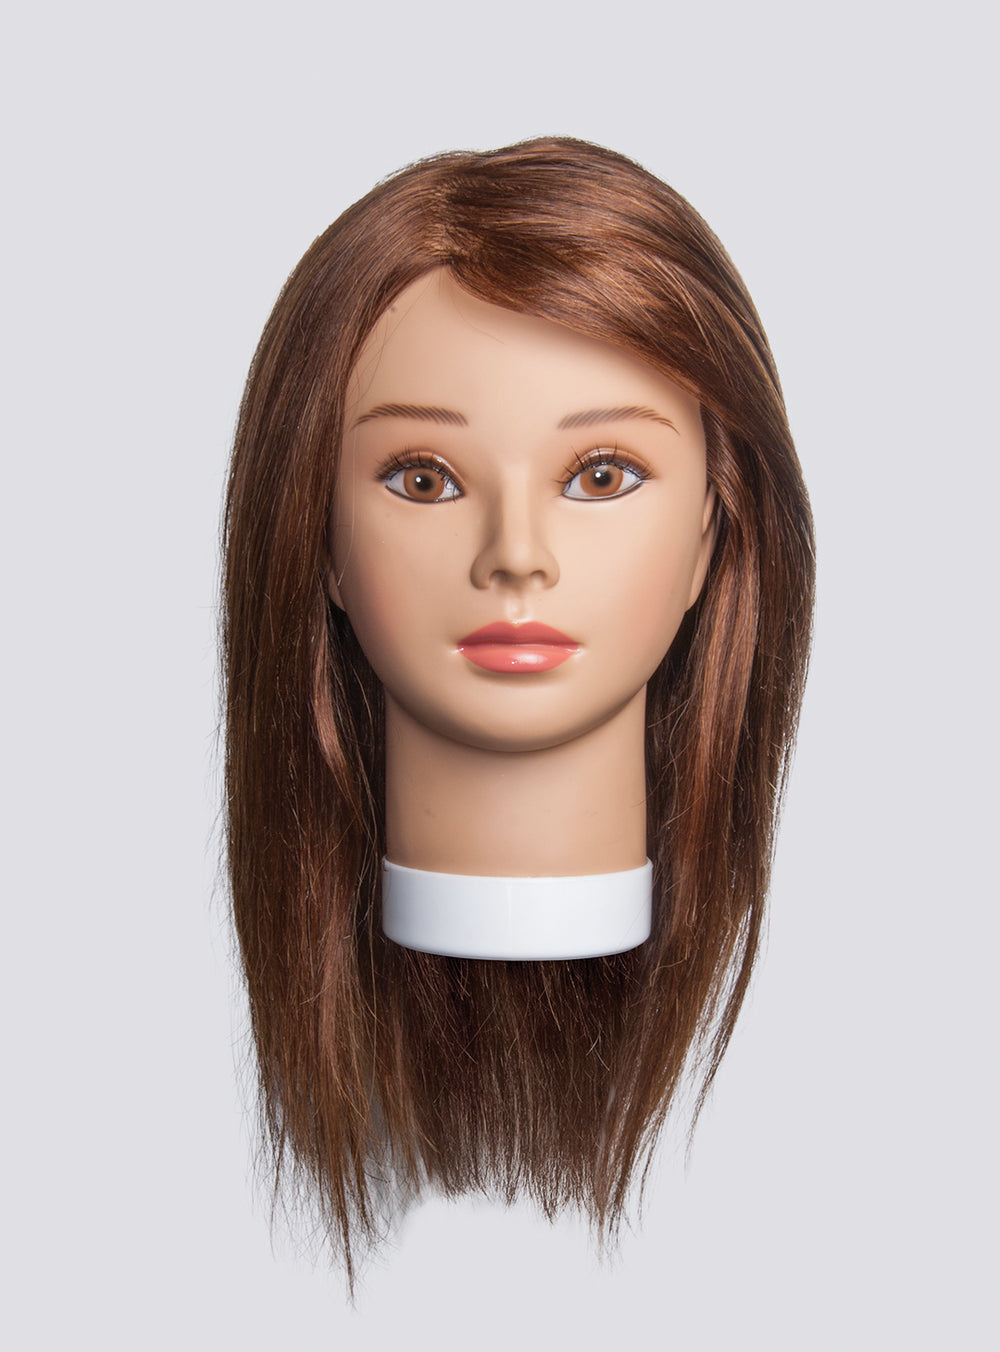 Armmu Mannequin Head with 100% Real Hair, 16 Hairdresser